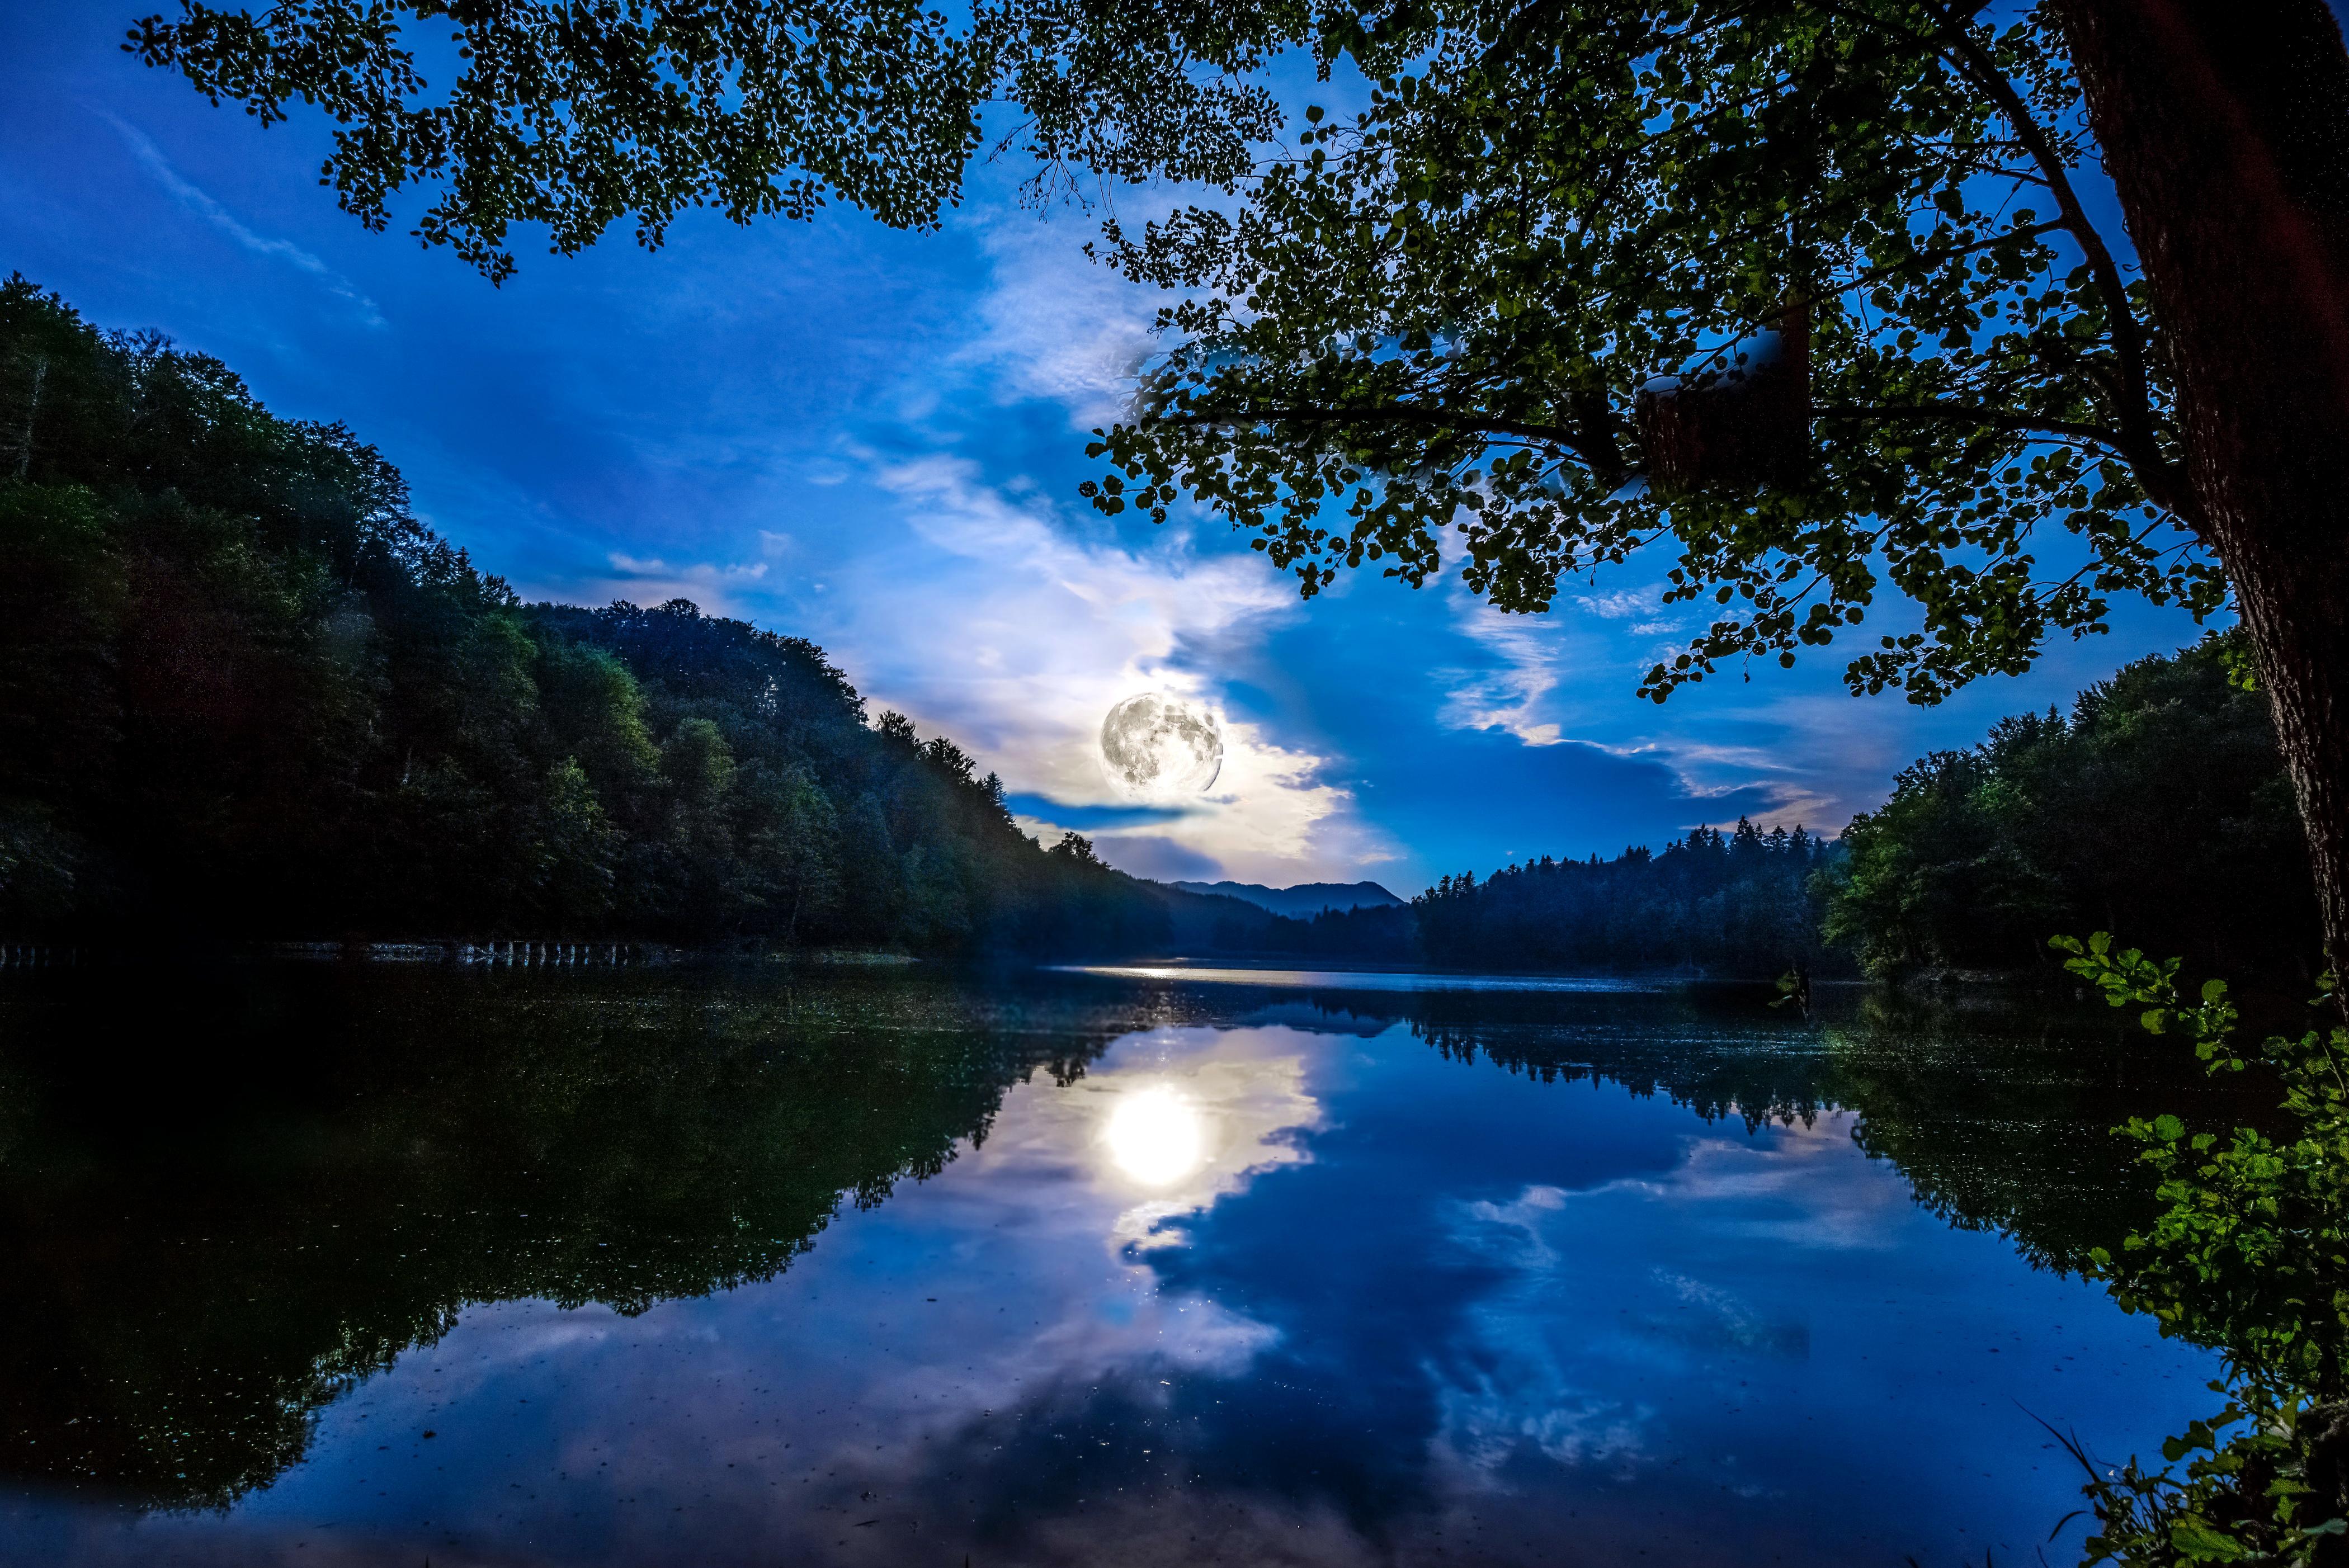 #Forest, K, #Full Moon, #Reflections, #Lake. Nature